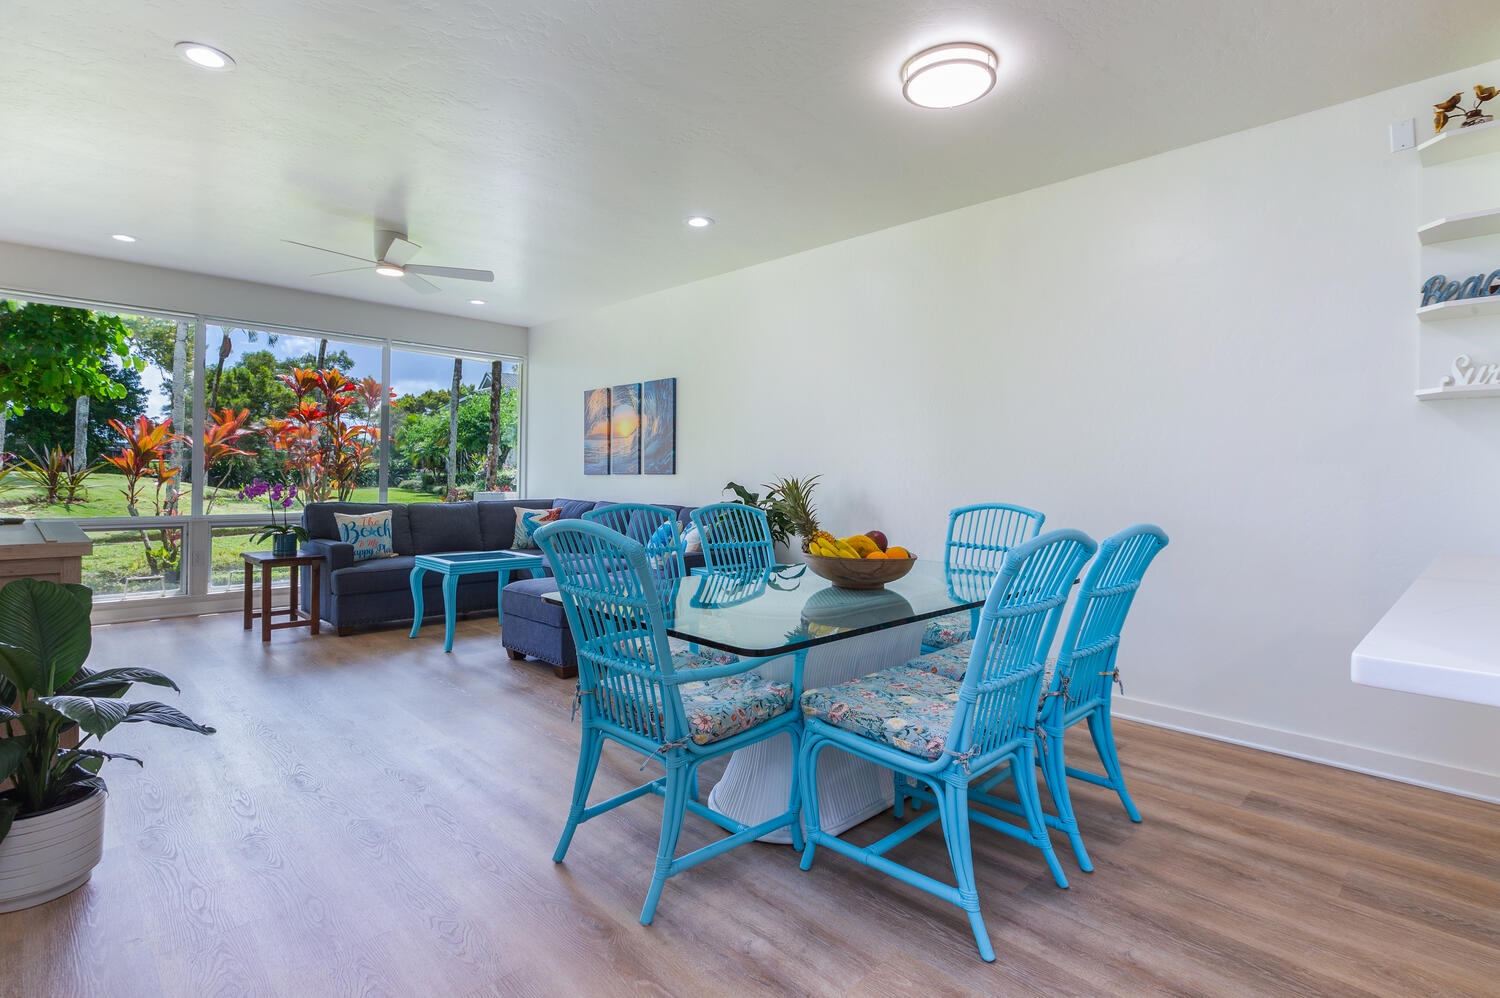 Princeville Vacation Rentals, Emmalani Court 414 - The perfect open-concept space for entertaining guests